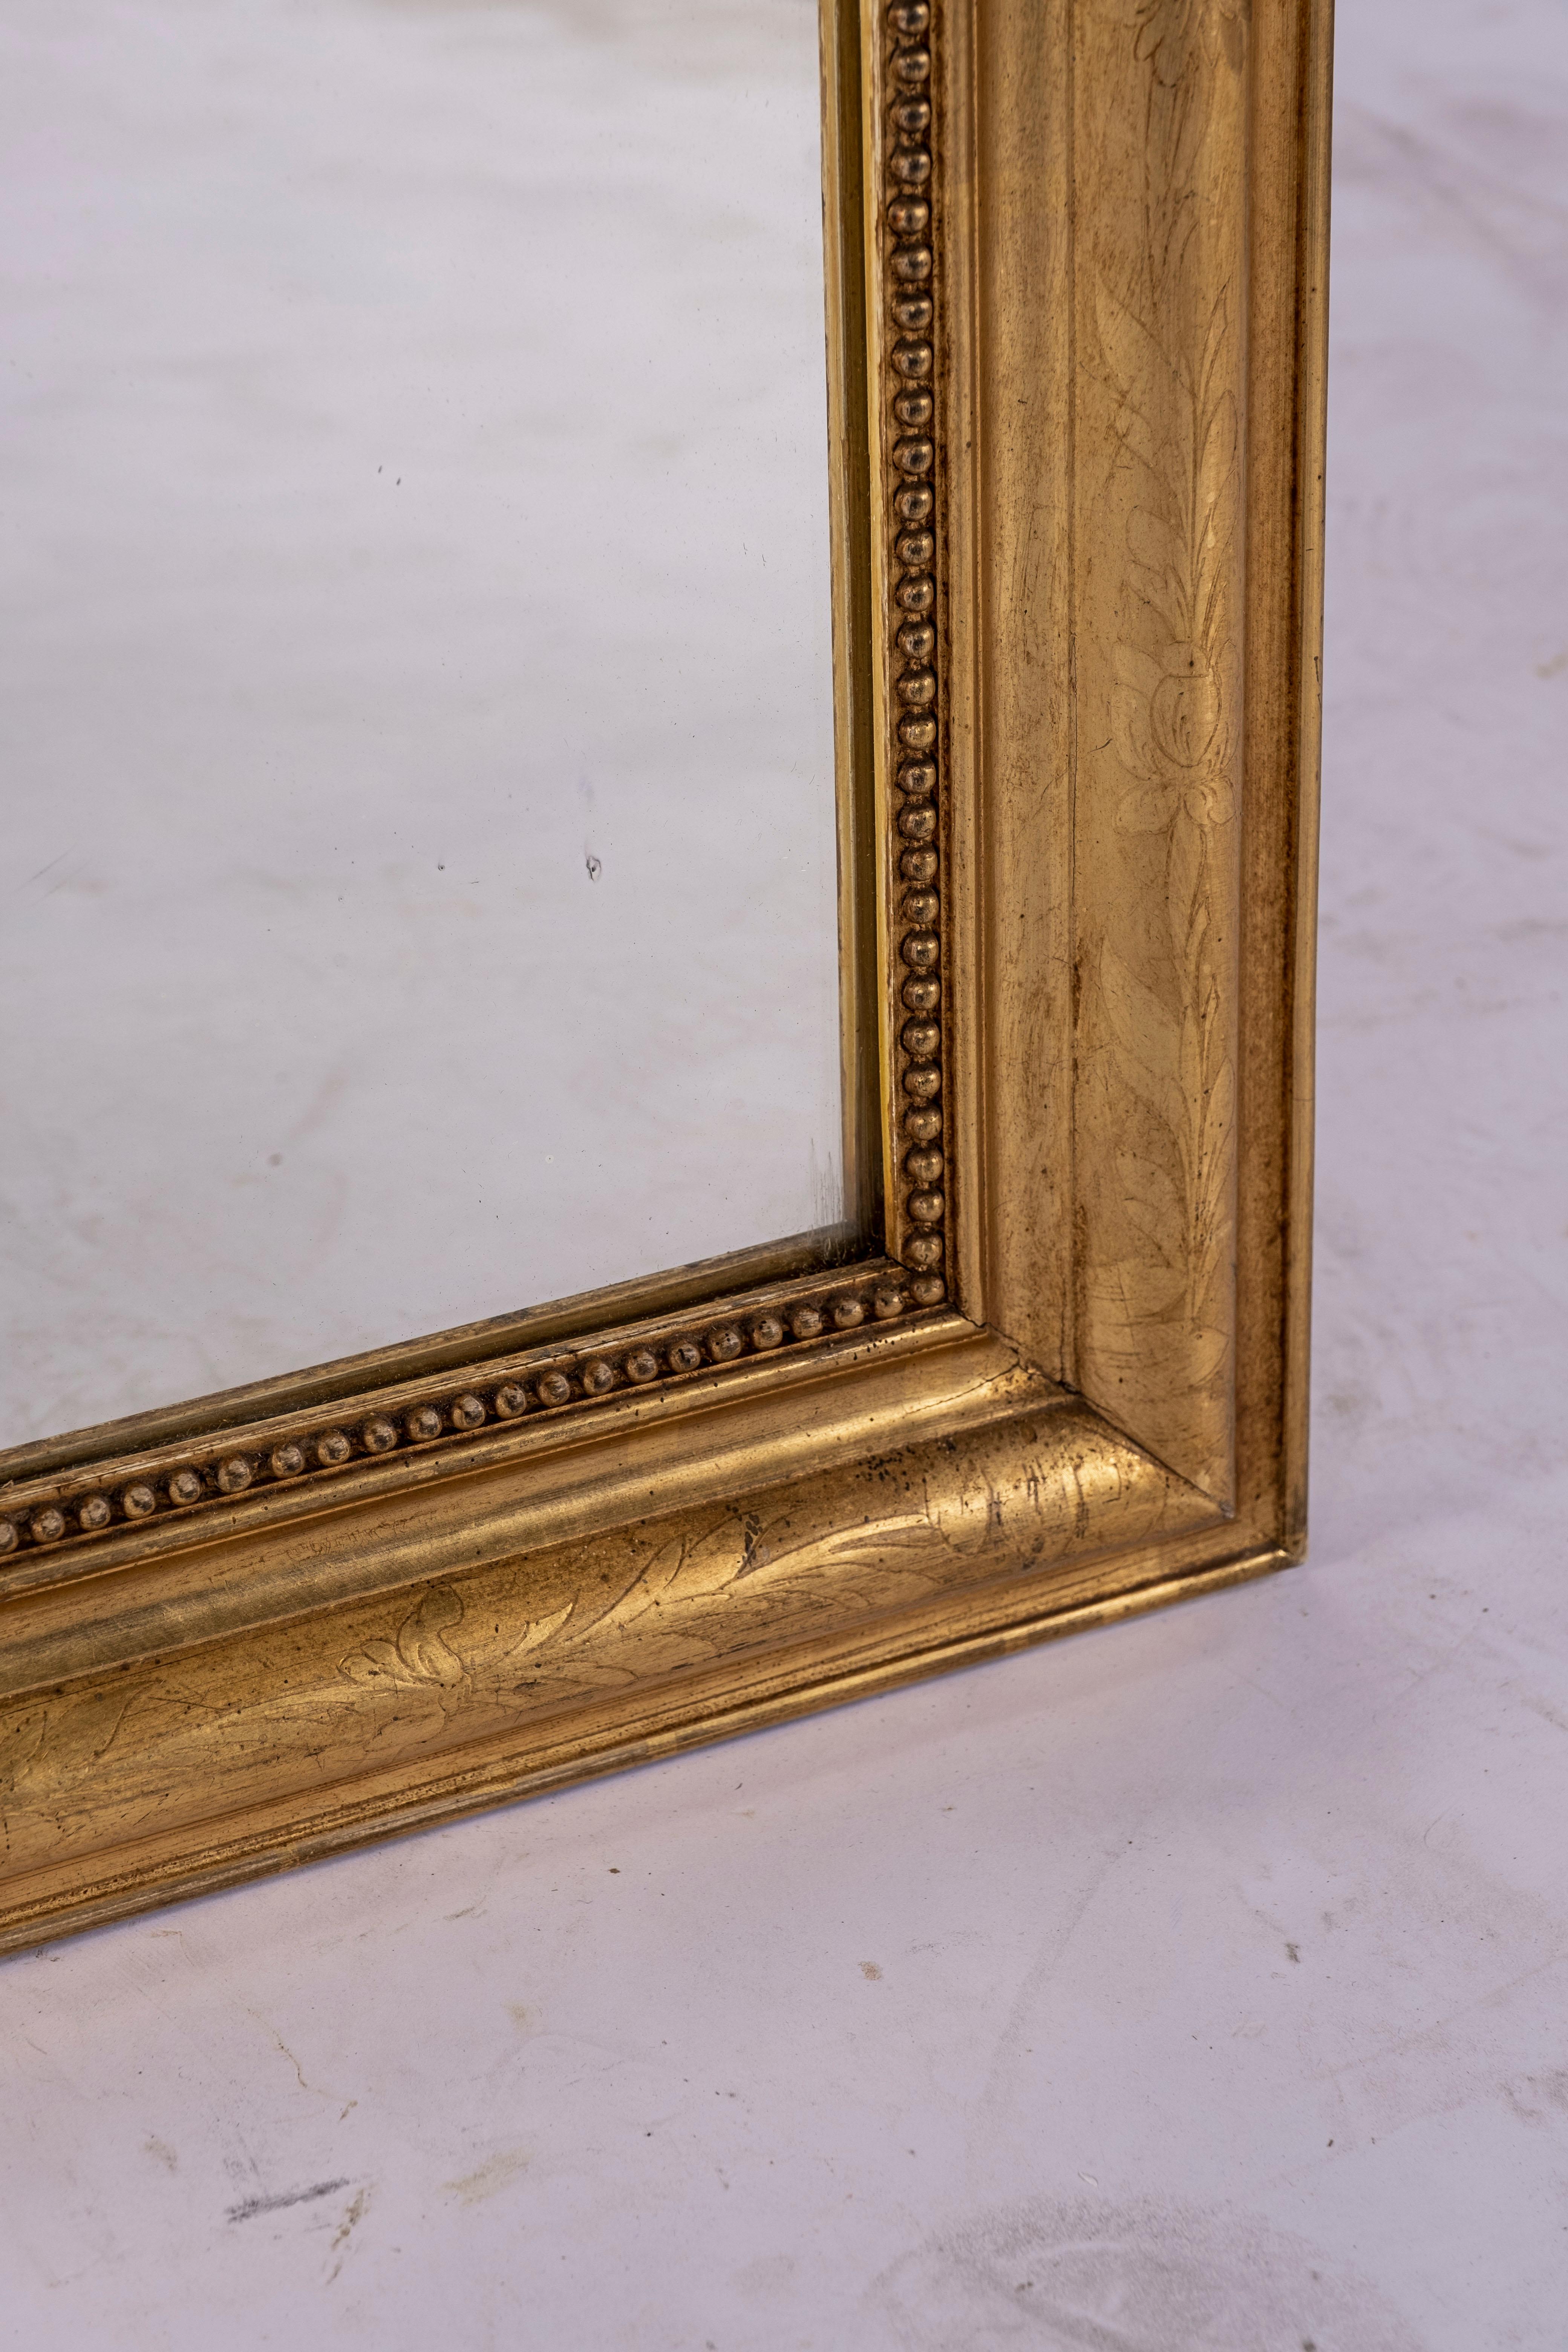 Large gilt on black Louis Philippe mirror with flower and leaf etching to frame. Original glass. Original pine board back with Paris Stamp, circa 1880.